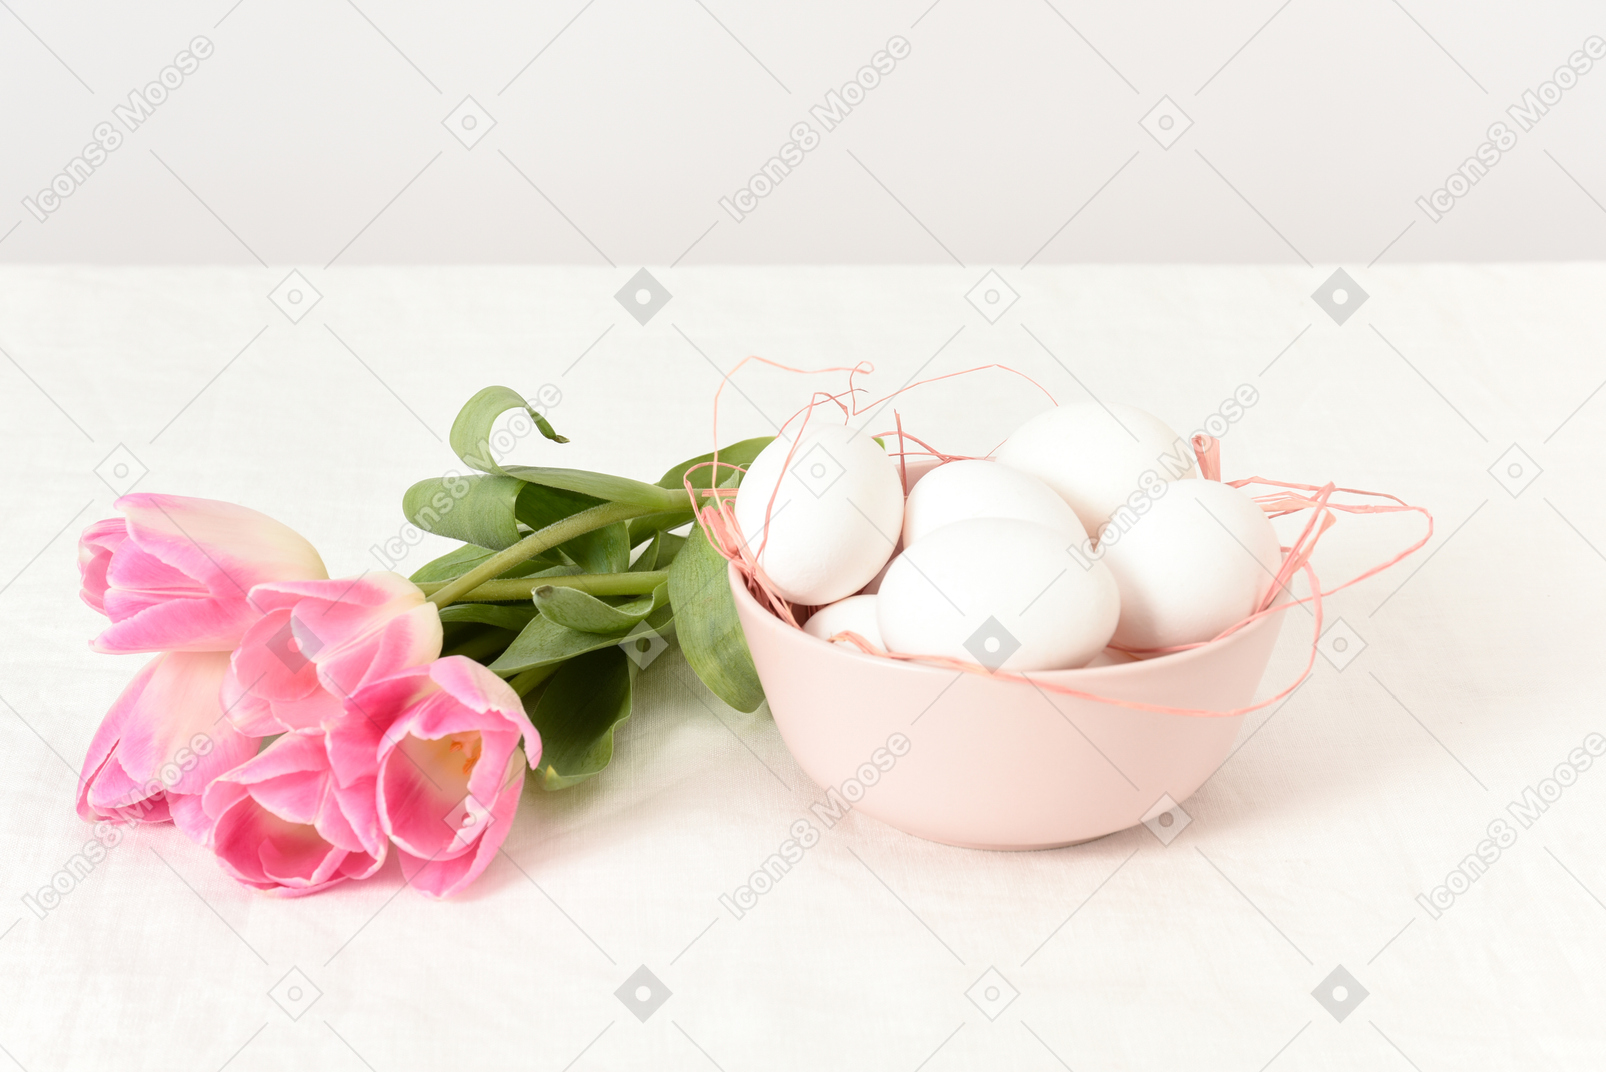 A bowl with eggs and a tulip bouquet